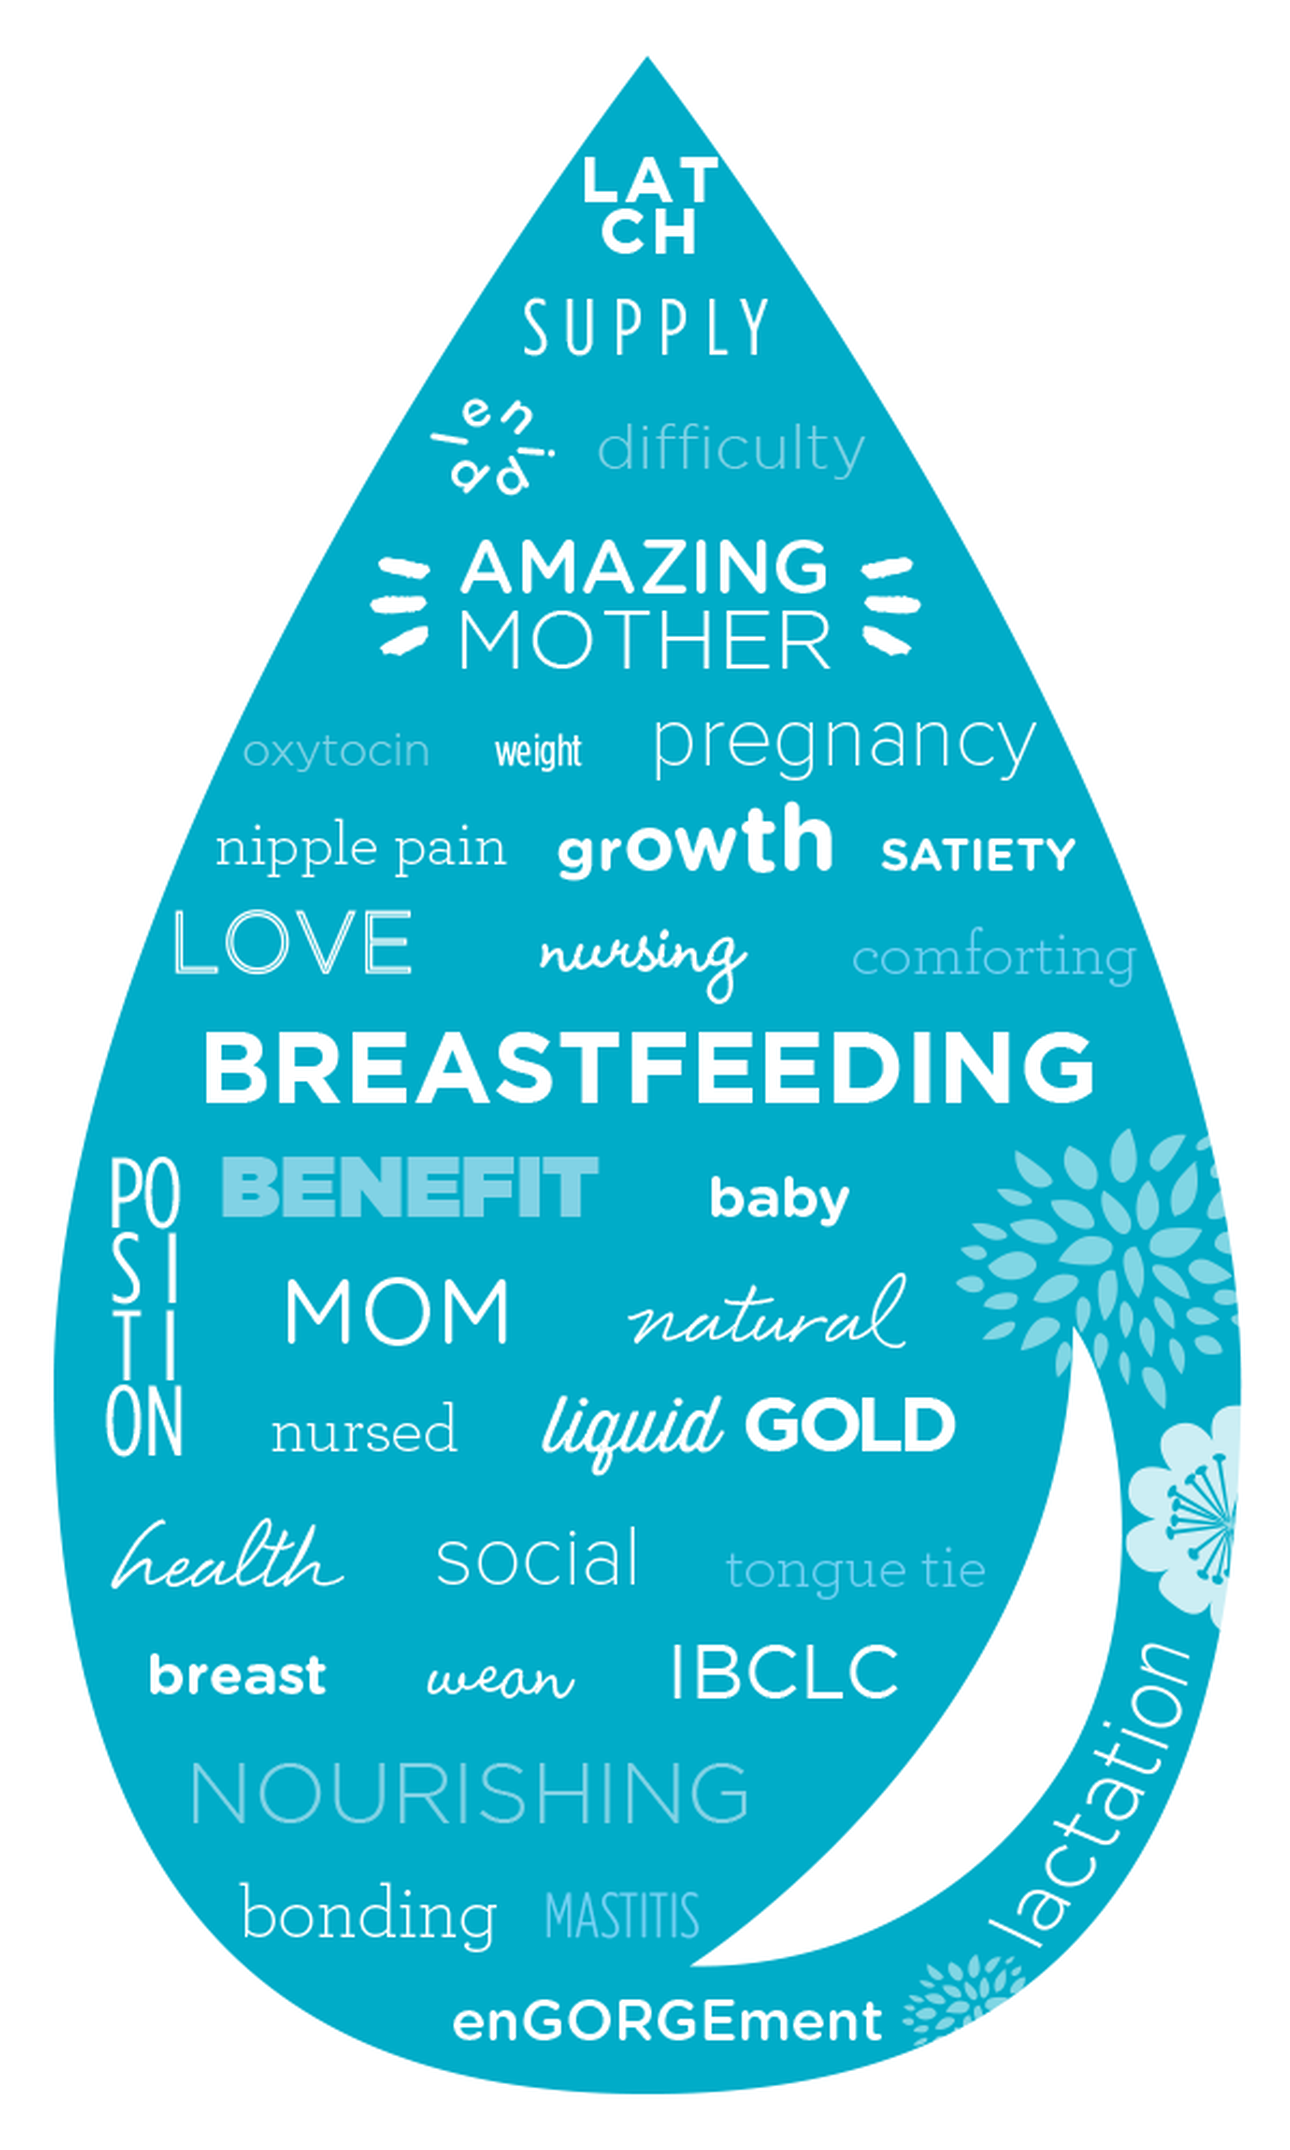 The Moms Co. - Sore, tender nipples are a common problem for breastfeeding  moms and can be caused due to tenderness from breastfeeding, latch issues,  skin dryness or wearing ill-fitting nursing bras. .